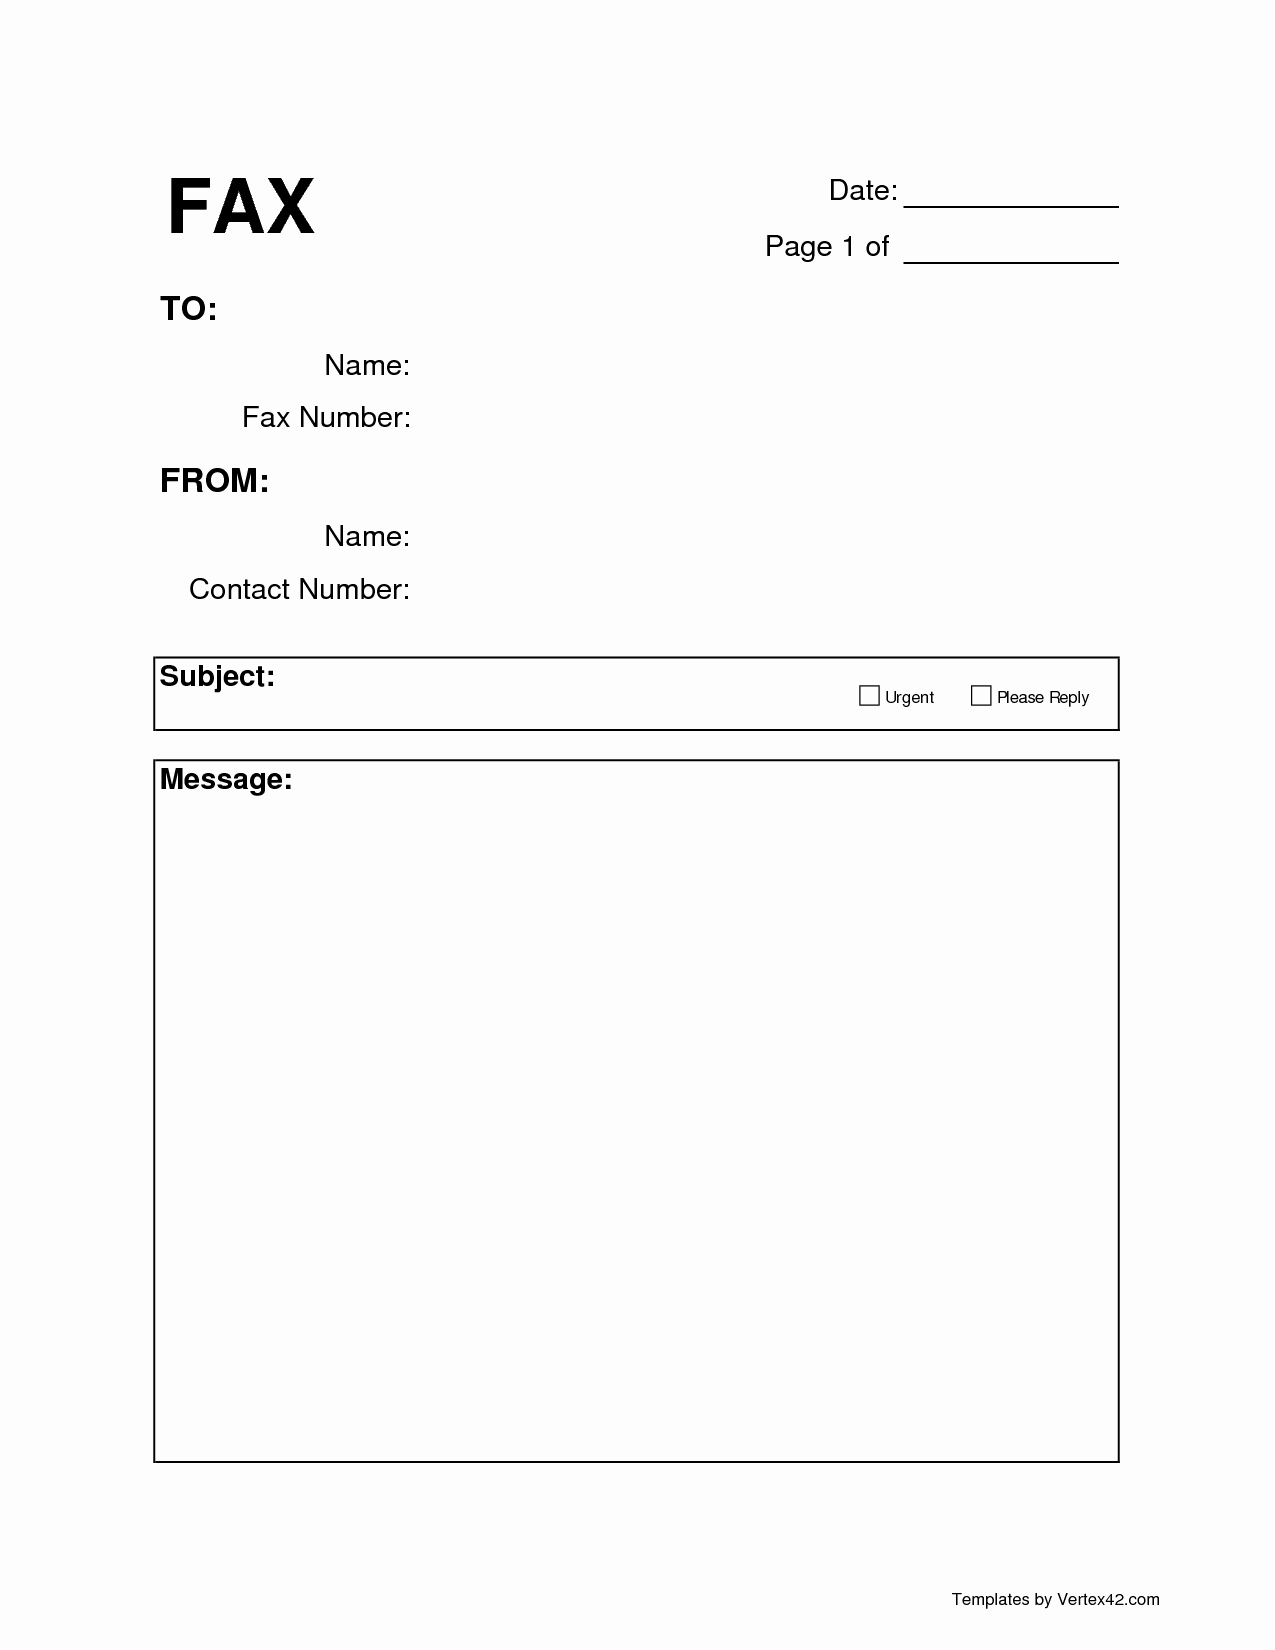 Personal Fax Cover Sheet Pdf Luxury 7 Best Of Printable Fax Cover Sheet Pdf Fax Cover